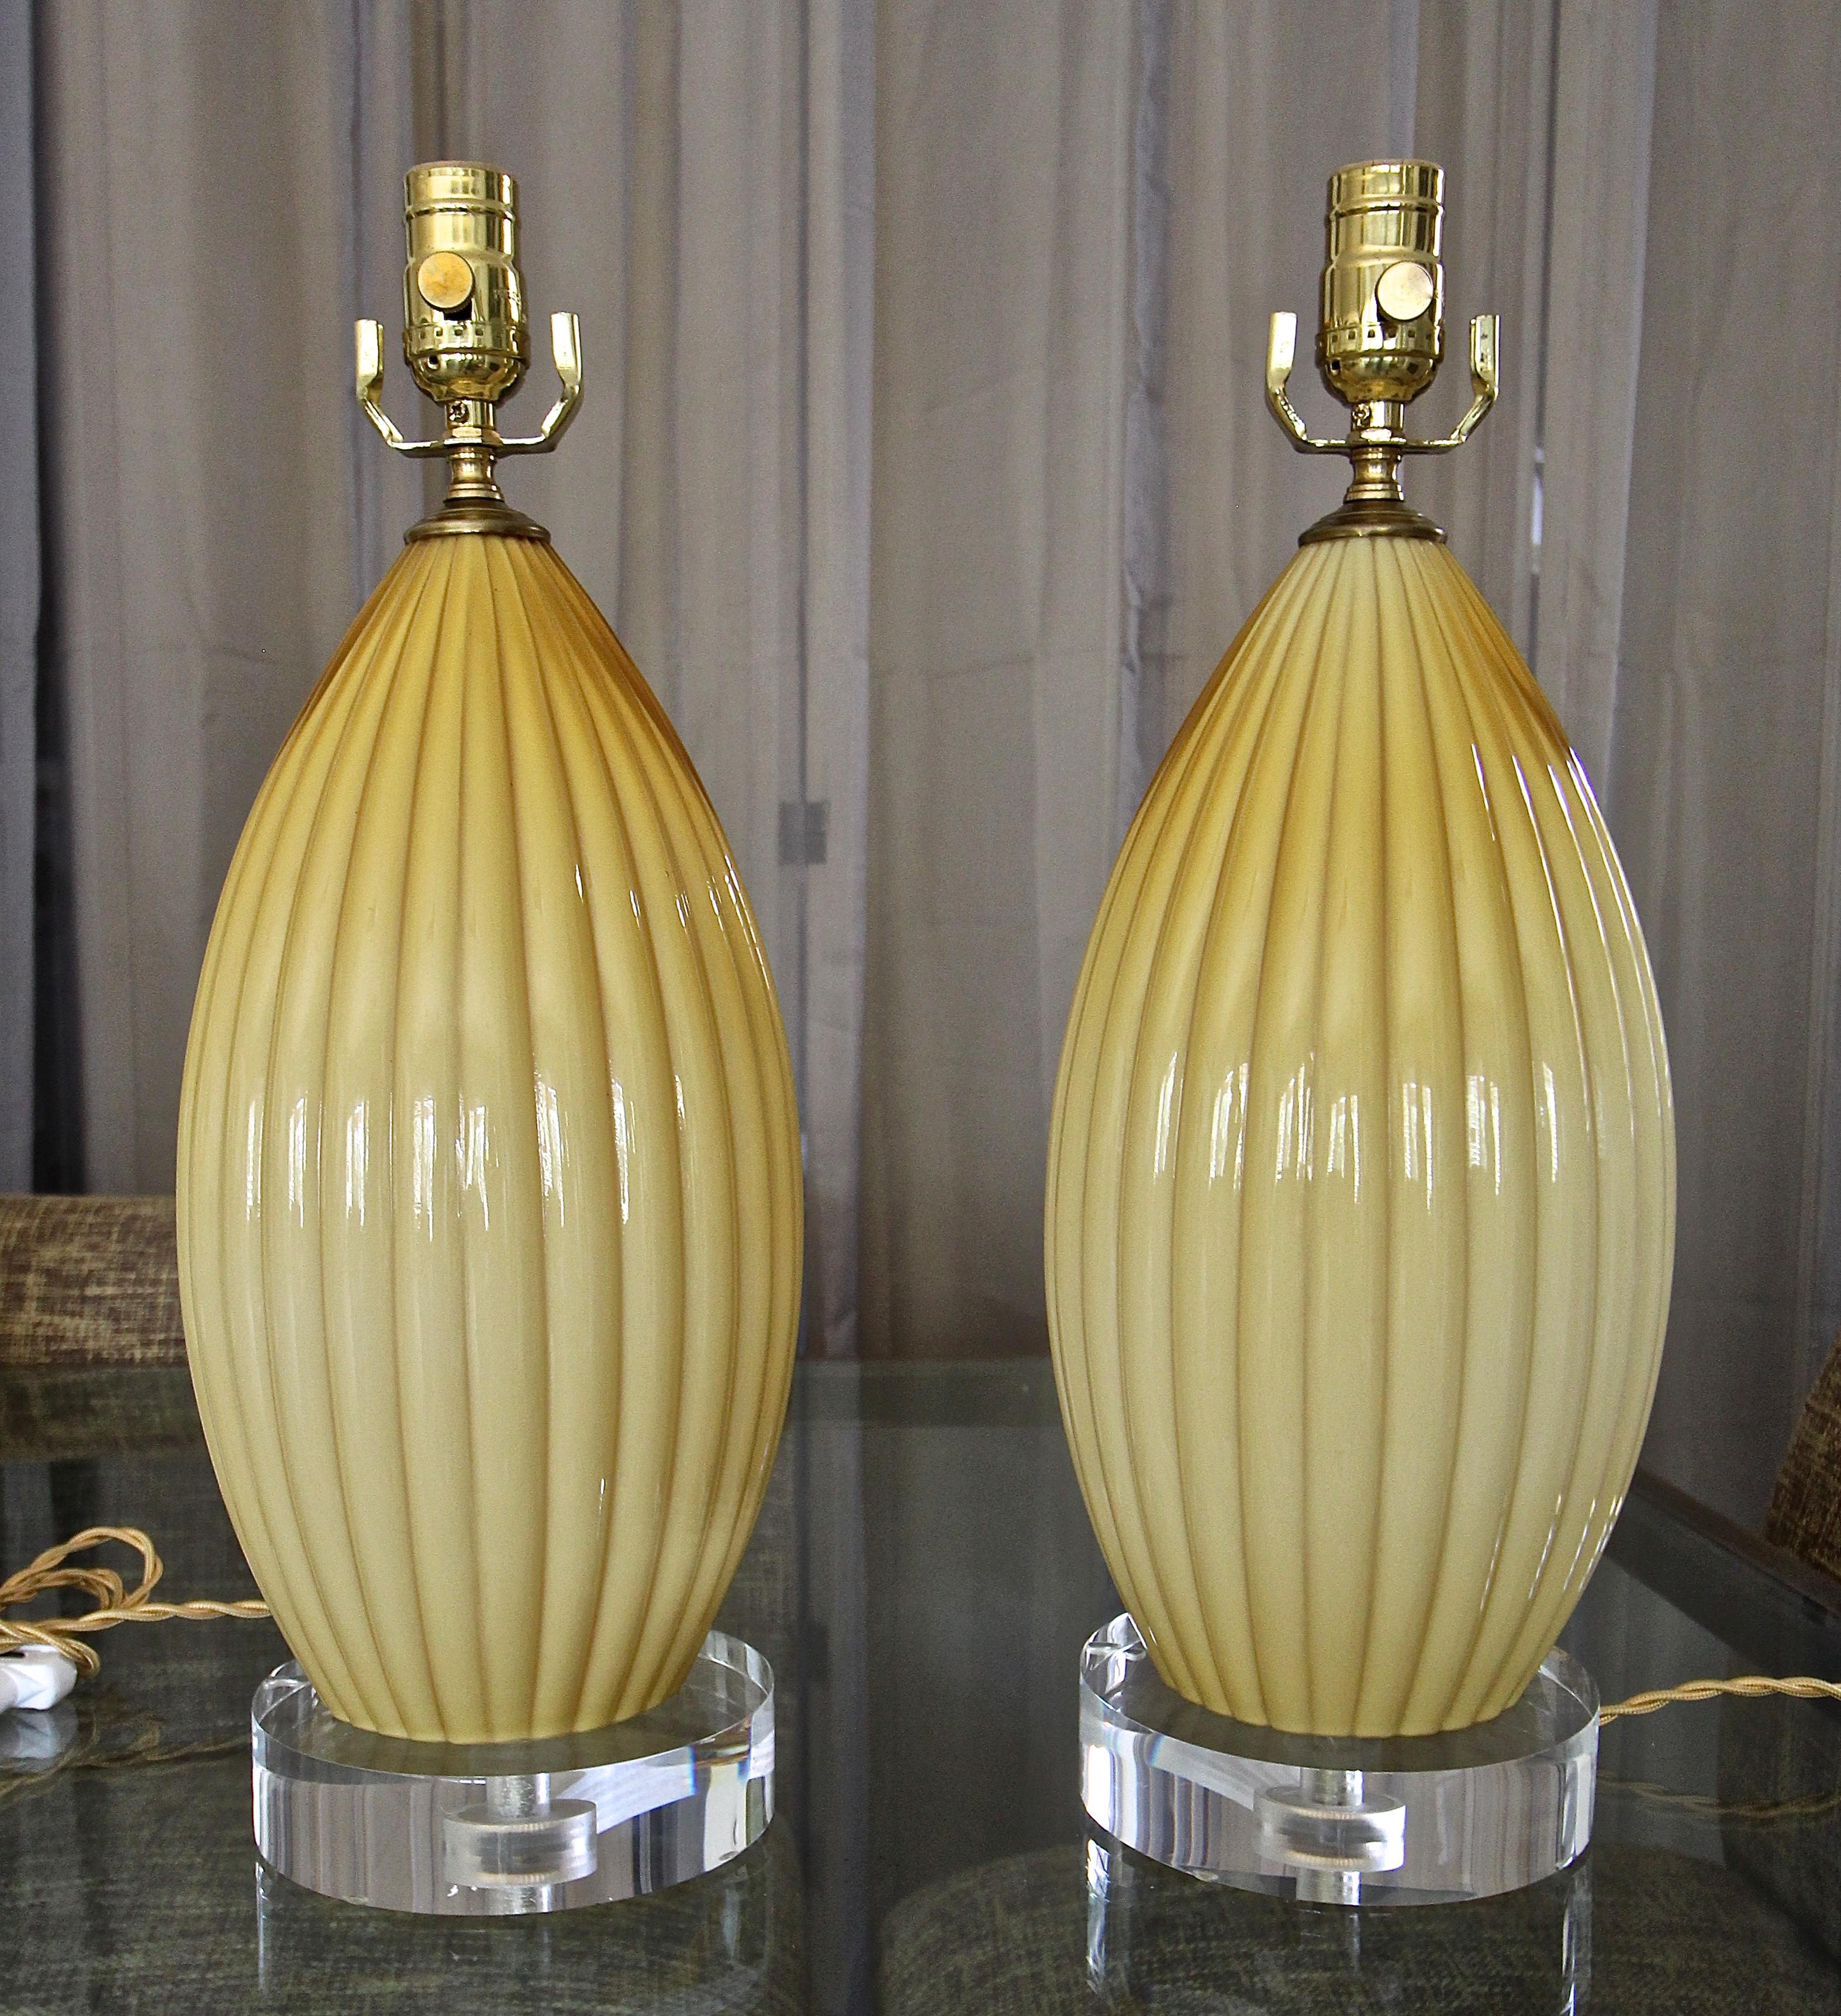 Pair of Murano Italian cased glass ribbed lamps, in a yellow butterscotch color on new custom acrylic bases. Newly wired for US with French style twisted rayon covered cords, lacquered brass fittings and on/off sockets. Shade for photography only